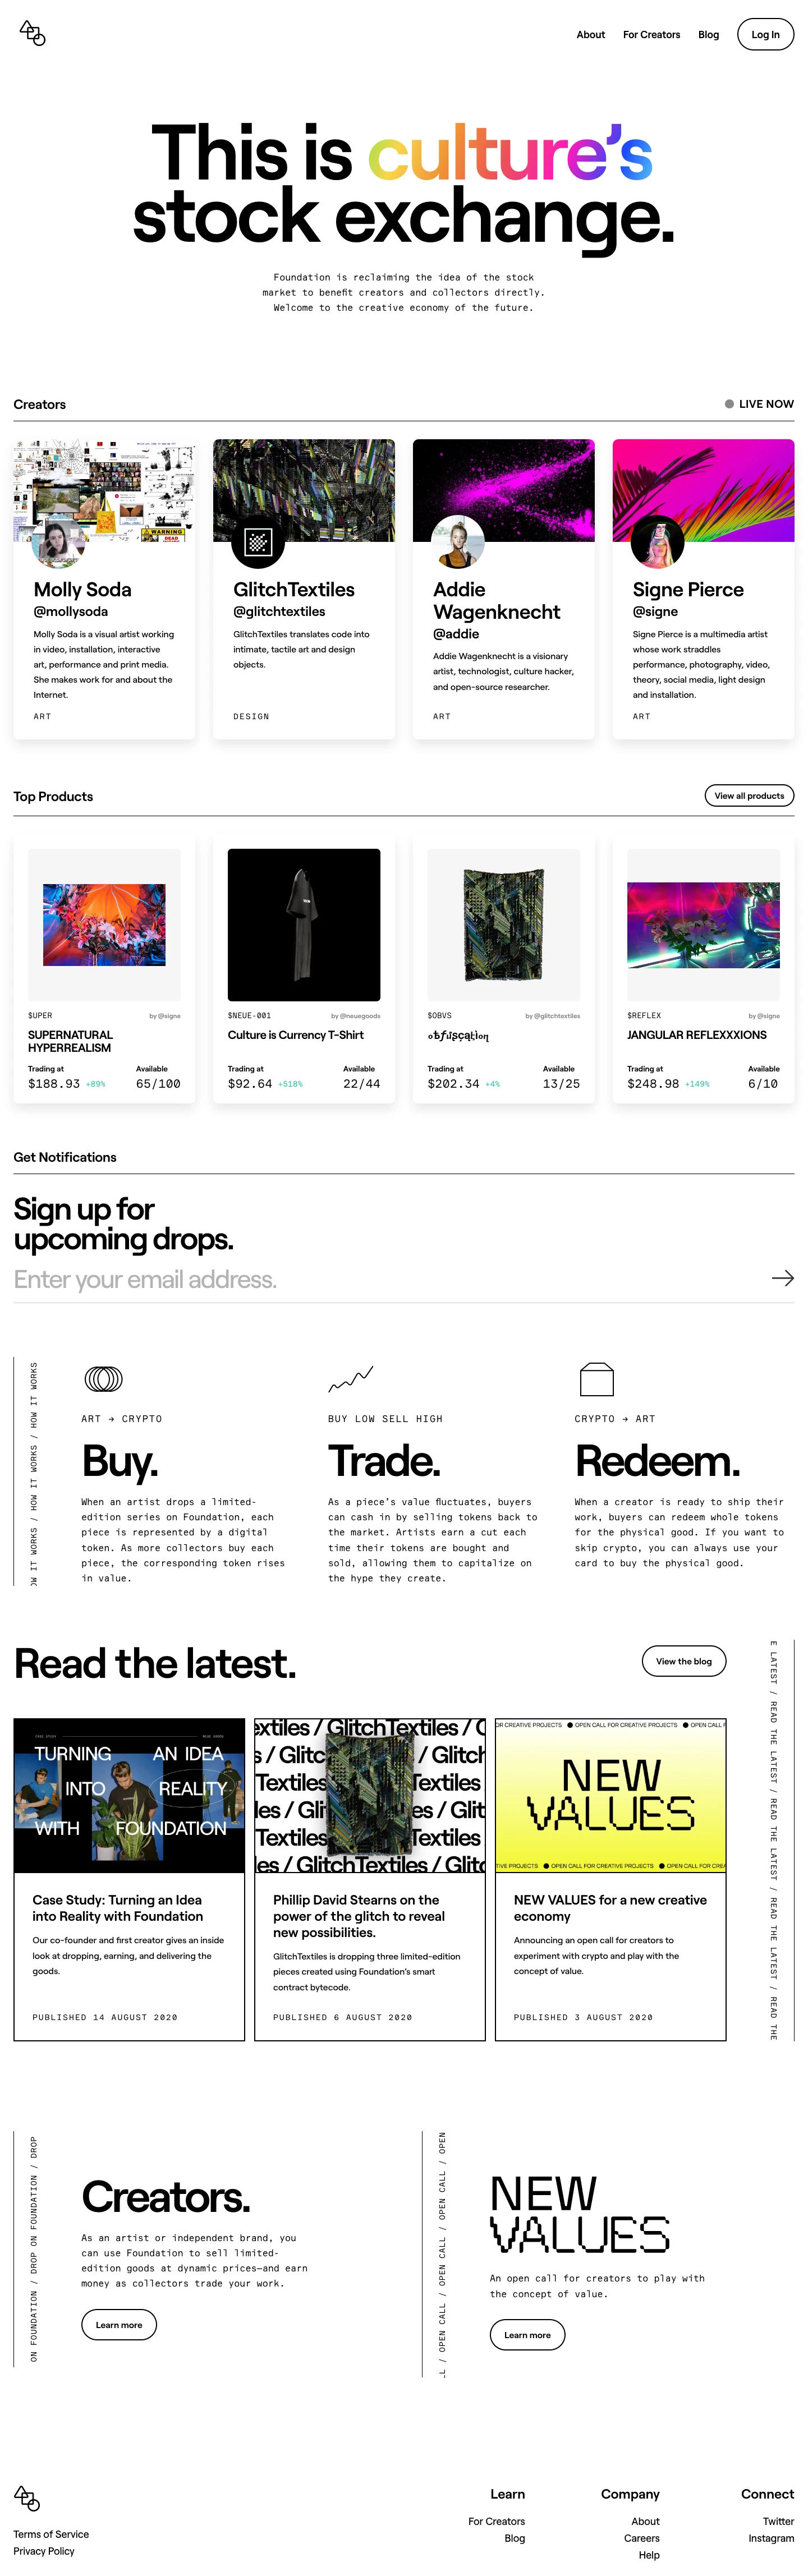 Foundation Landing Page Example: This is culture’s stock exchange. Foundation is reclaiming the idea of the stock market to benefit creators and collectors directly. Welcome to the creative economy of the future.